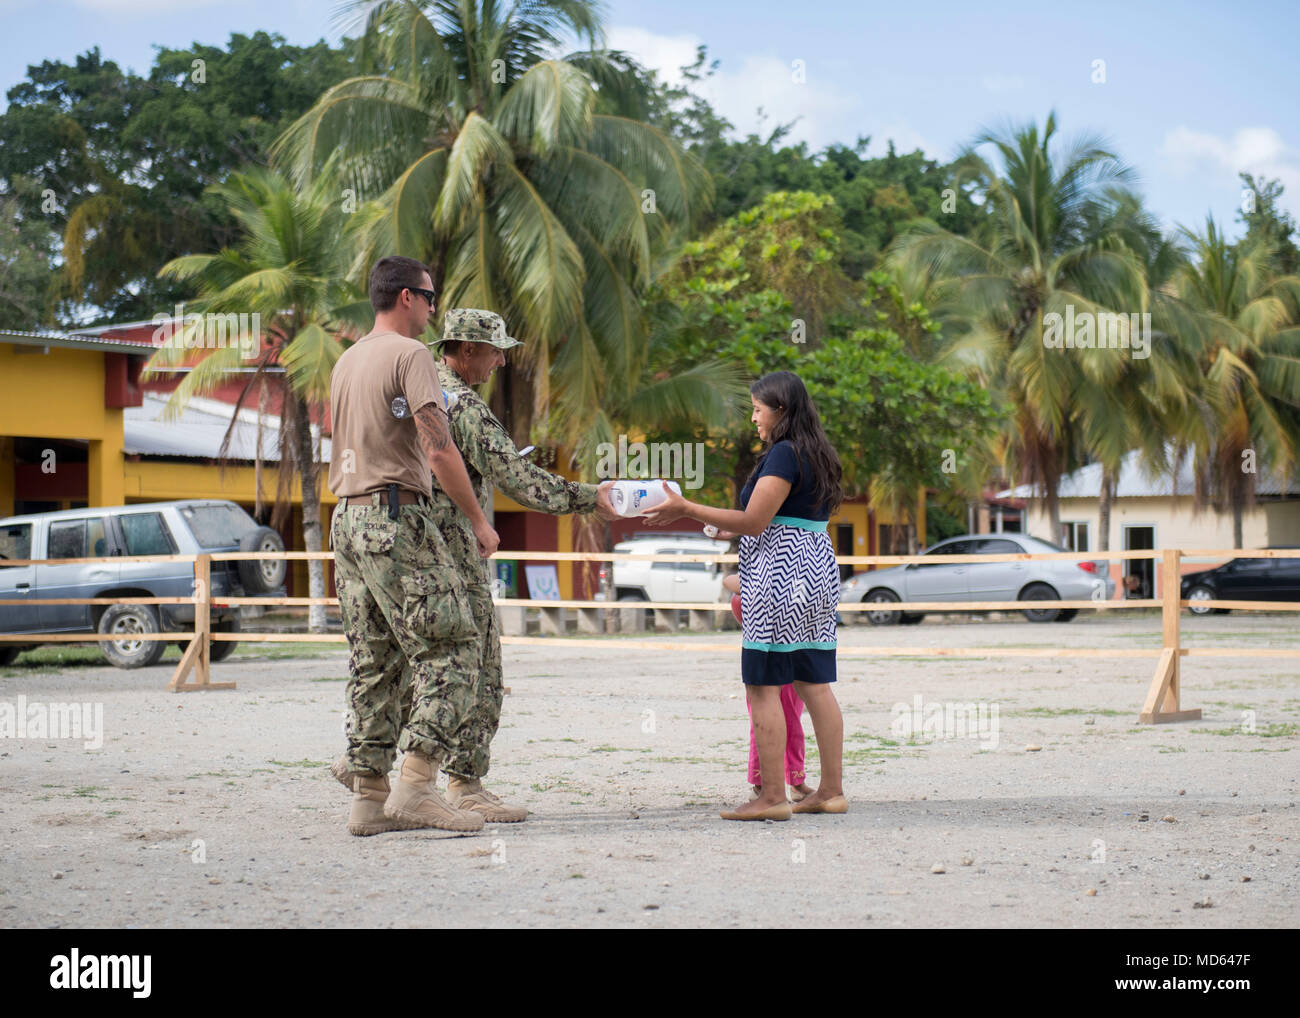 180322-N-UP035-0248 PUERTO CORTES, Honduras (March 22, 2018) Capt. Angel Cuz, Commodore of Destroyer Squadron (DESRON) 40, hands a package of toilet paper to a Honduran girl at the Franklin D. Roosevelt School in Puerto Cortes, Honduras during Continuing Promise 2018. U.S. Naval Forces Southern Command/U.S. 4th Fleet has deployed a force to execute Continuing Promise to conduct civil-military operations including humanitarian assistance, training engagements, and medical, dental, and veterinary support in an effort to show U.S. support and commitment to Central and South America. (U.S. Navy ph Stock Photo